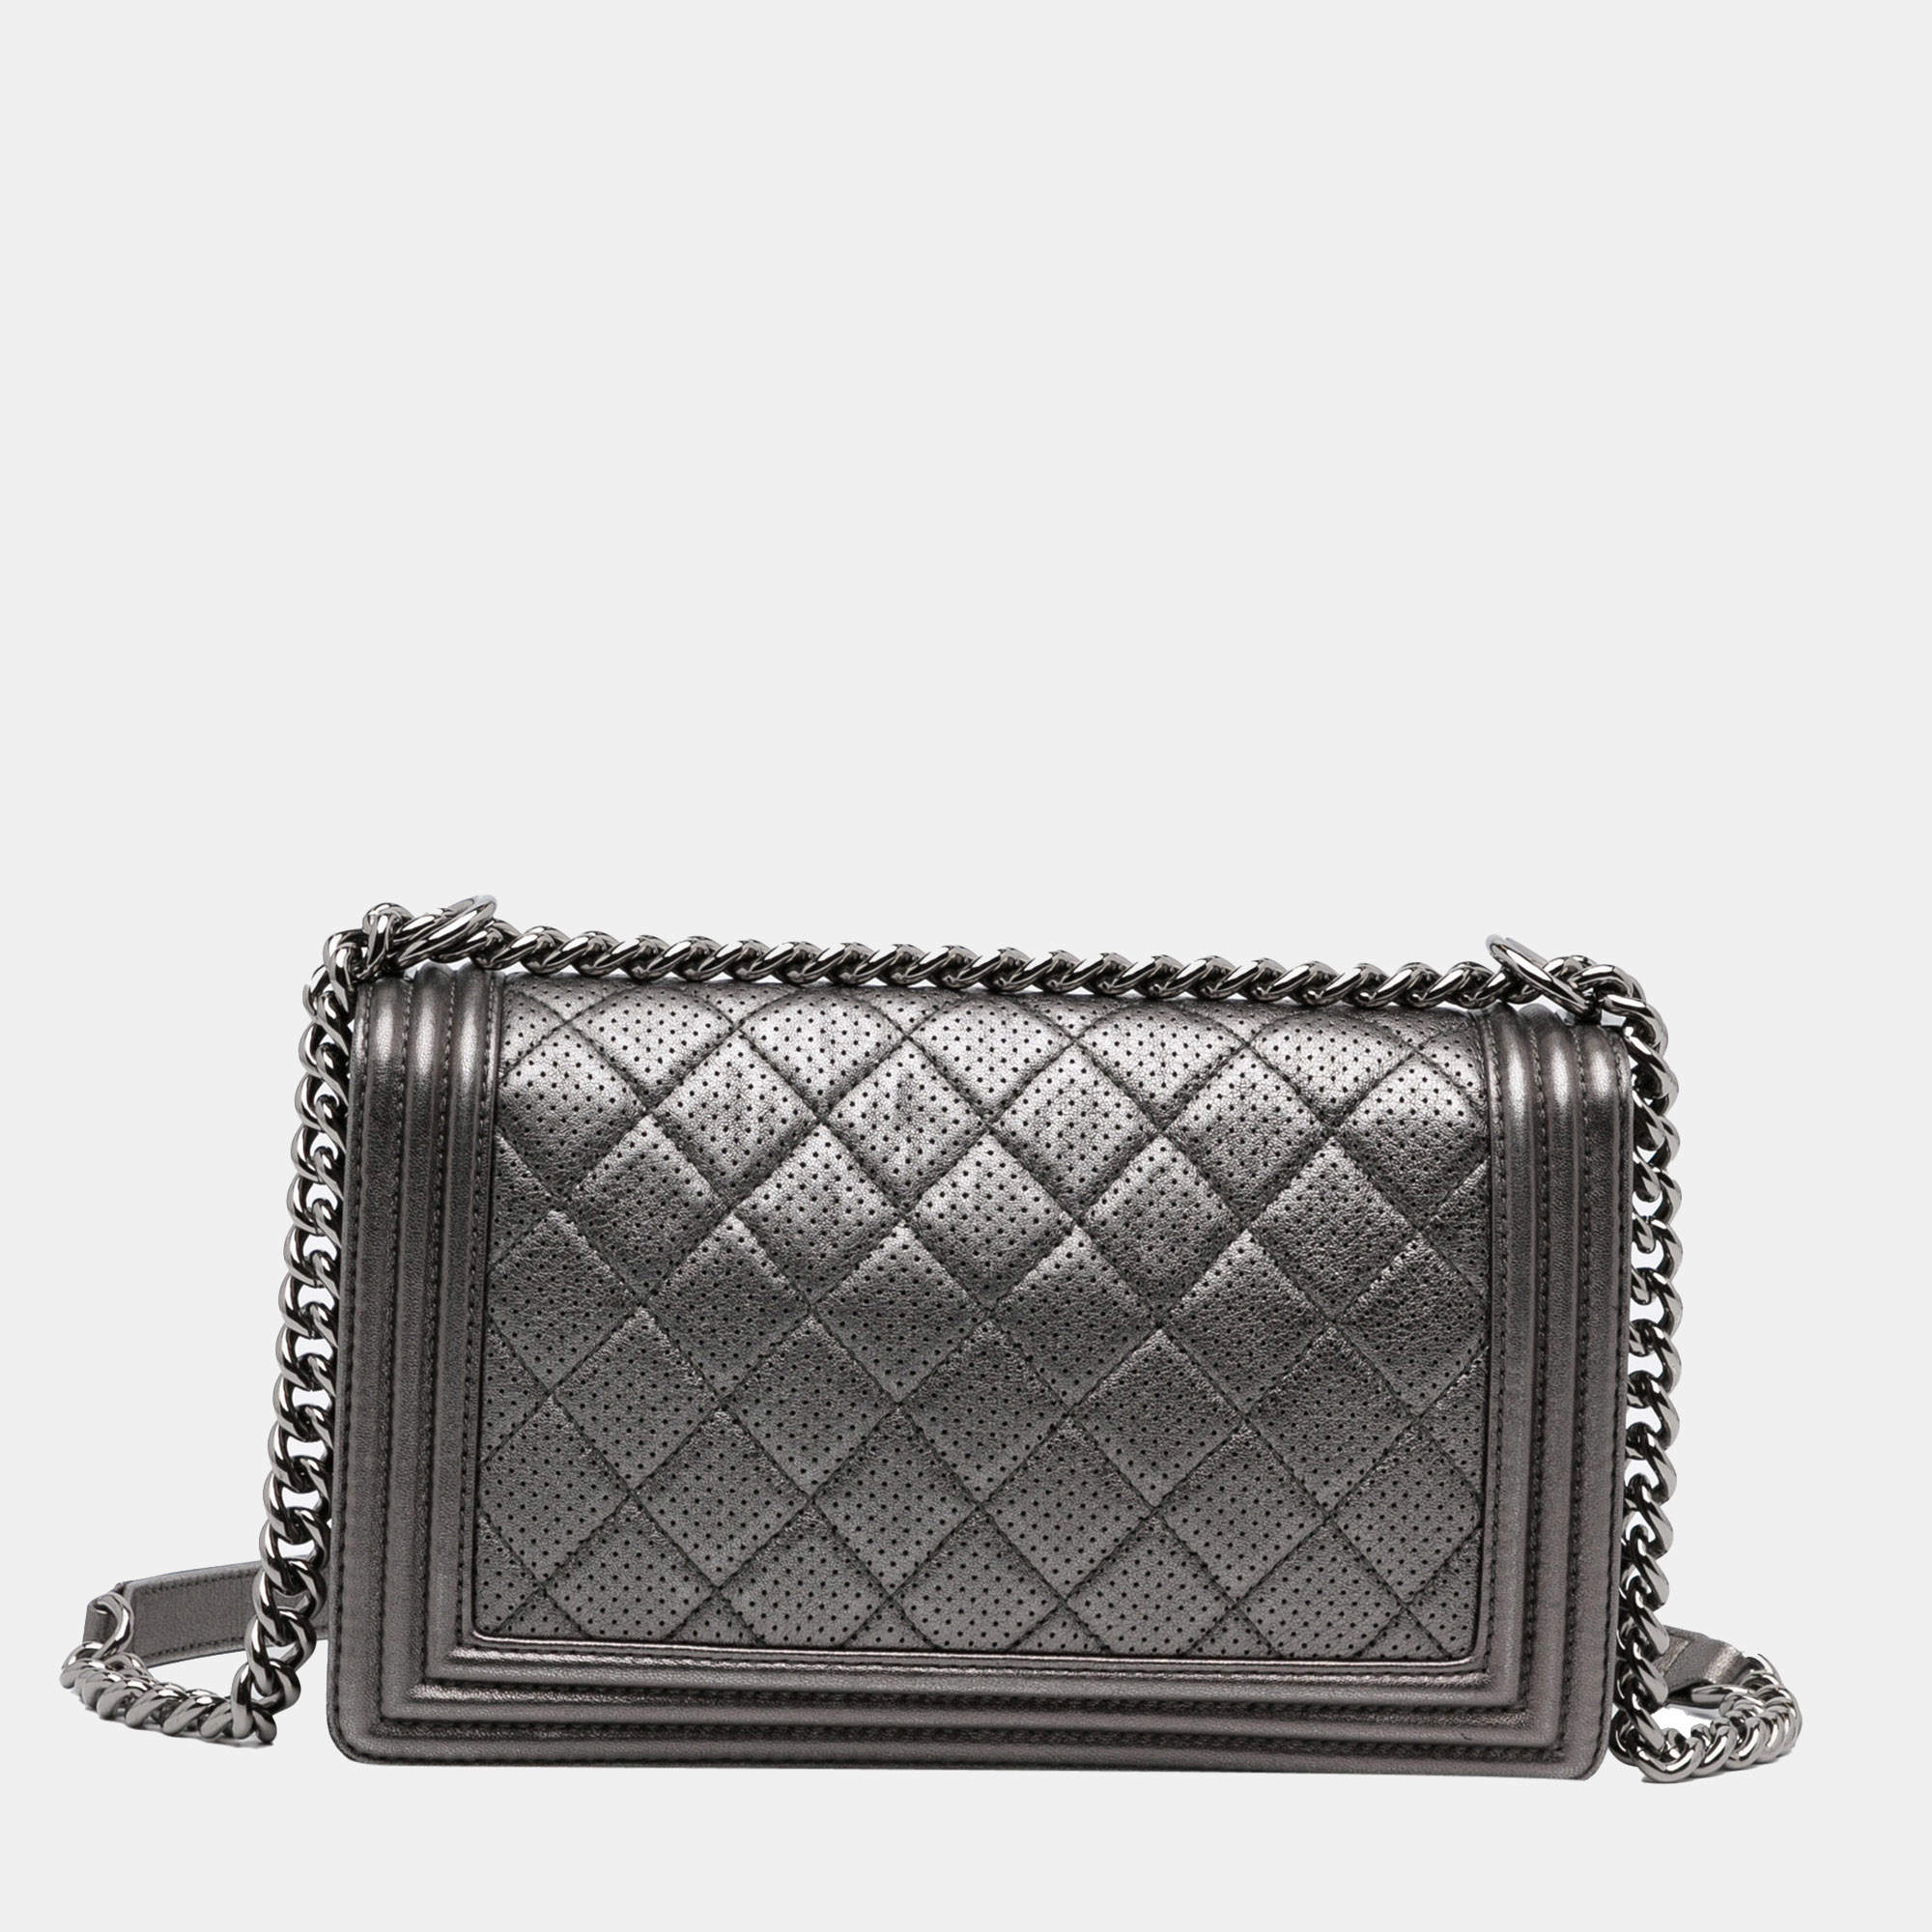 Chanel Mini Boy Bag in White Leather with Silver Hardware  UFO No More